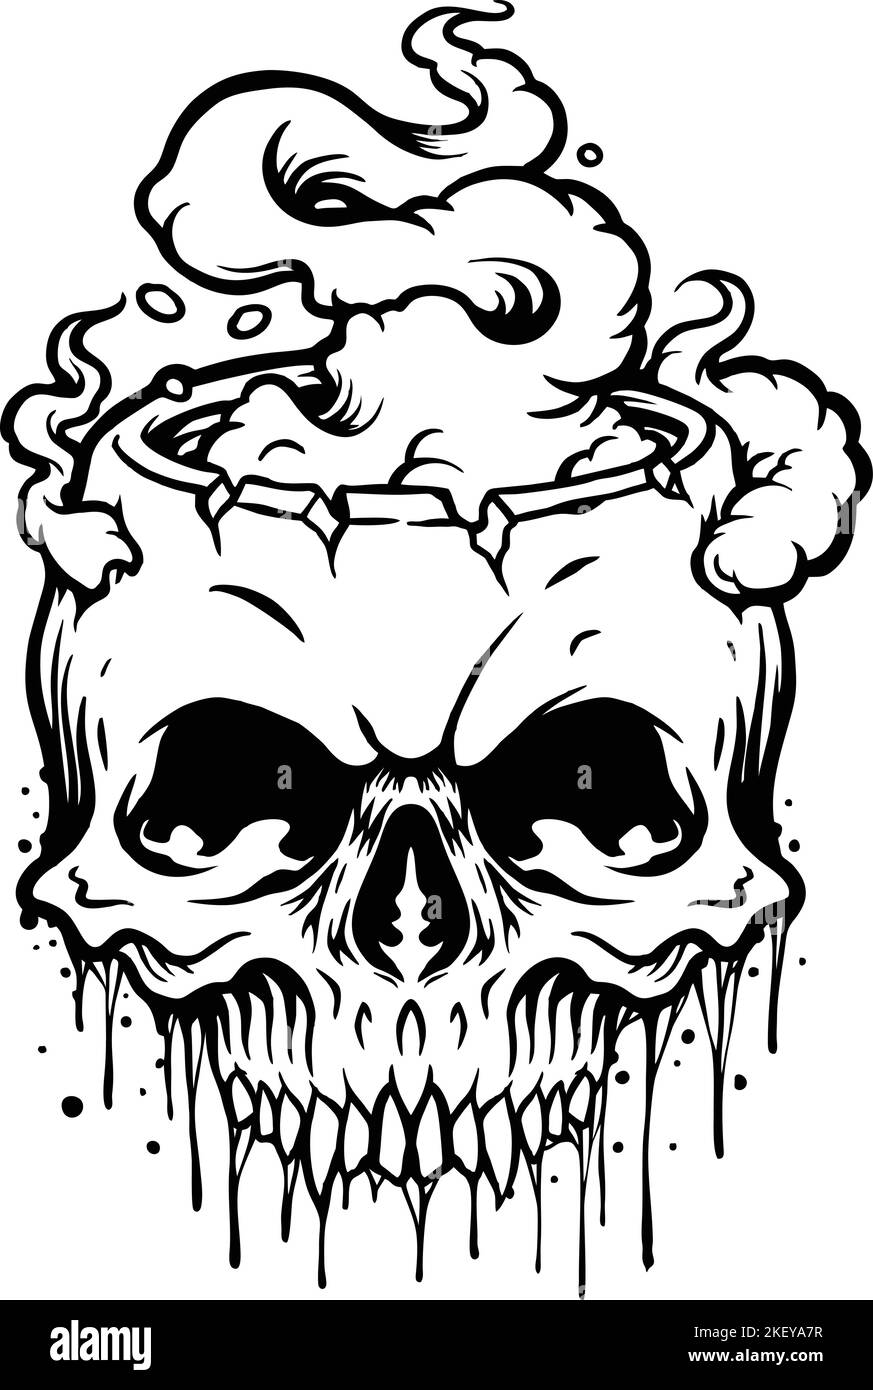 Skull Burning Cloud outline vector illustrations for your work logo, merchandise t-shirt, stickers and label designs, poster, greeting cards Stock Vector